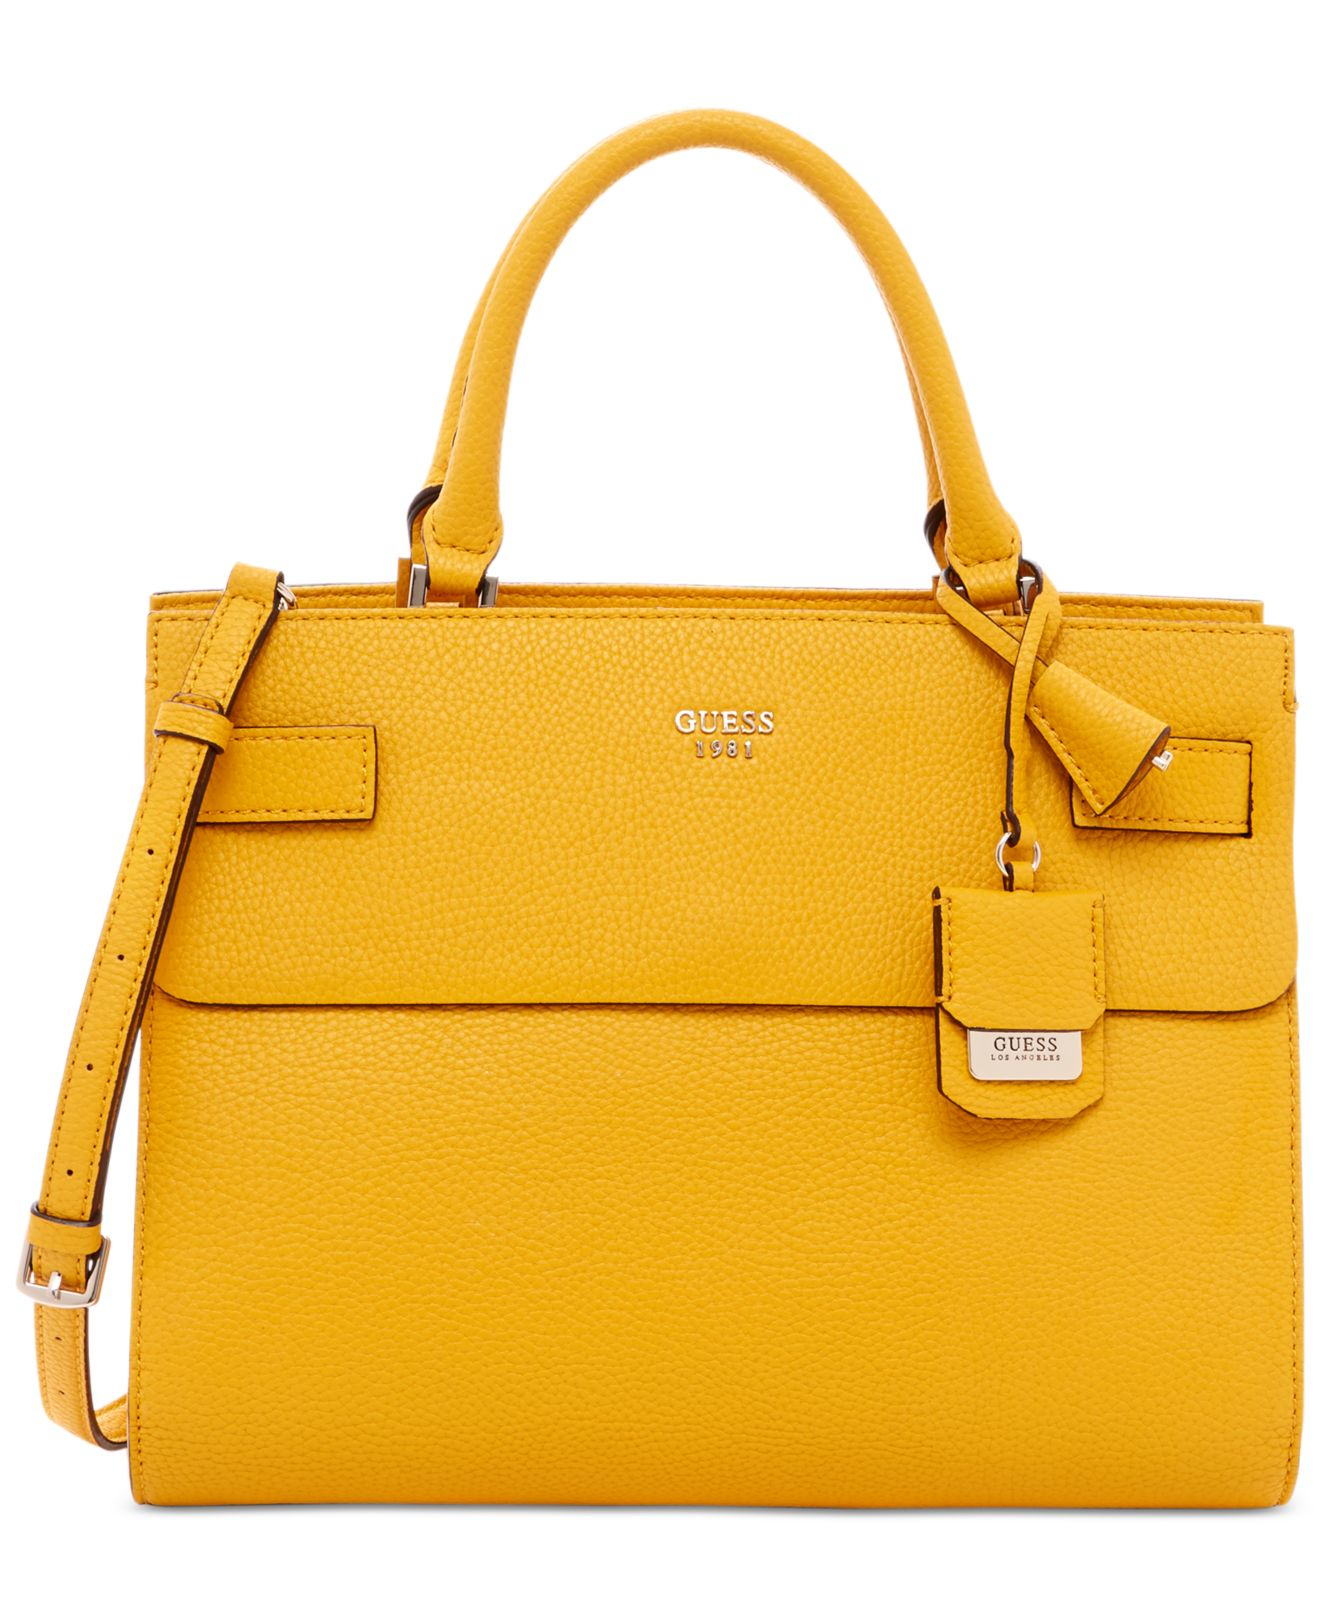 Guess Cate Satchel in Yellow - Lyst